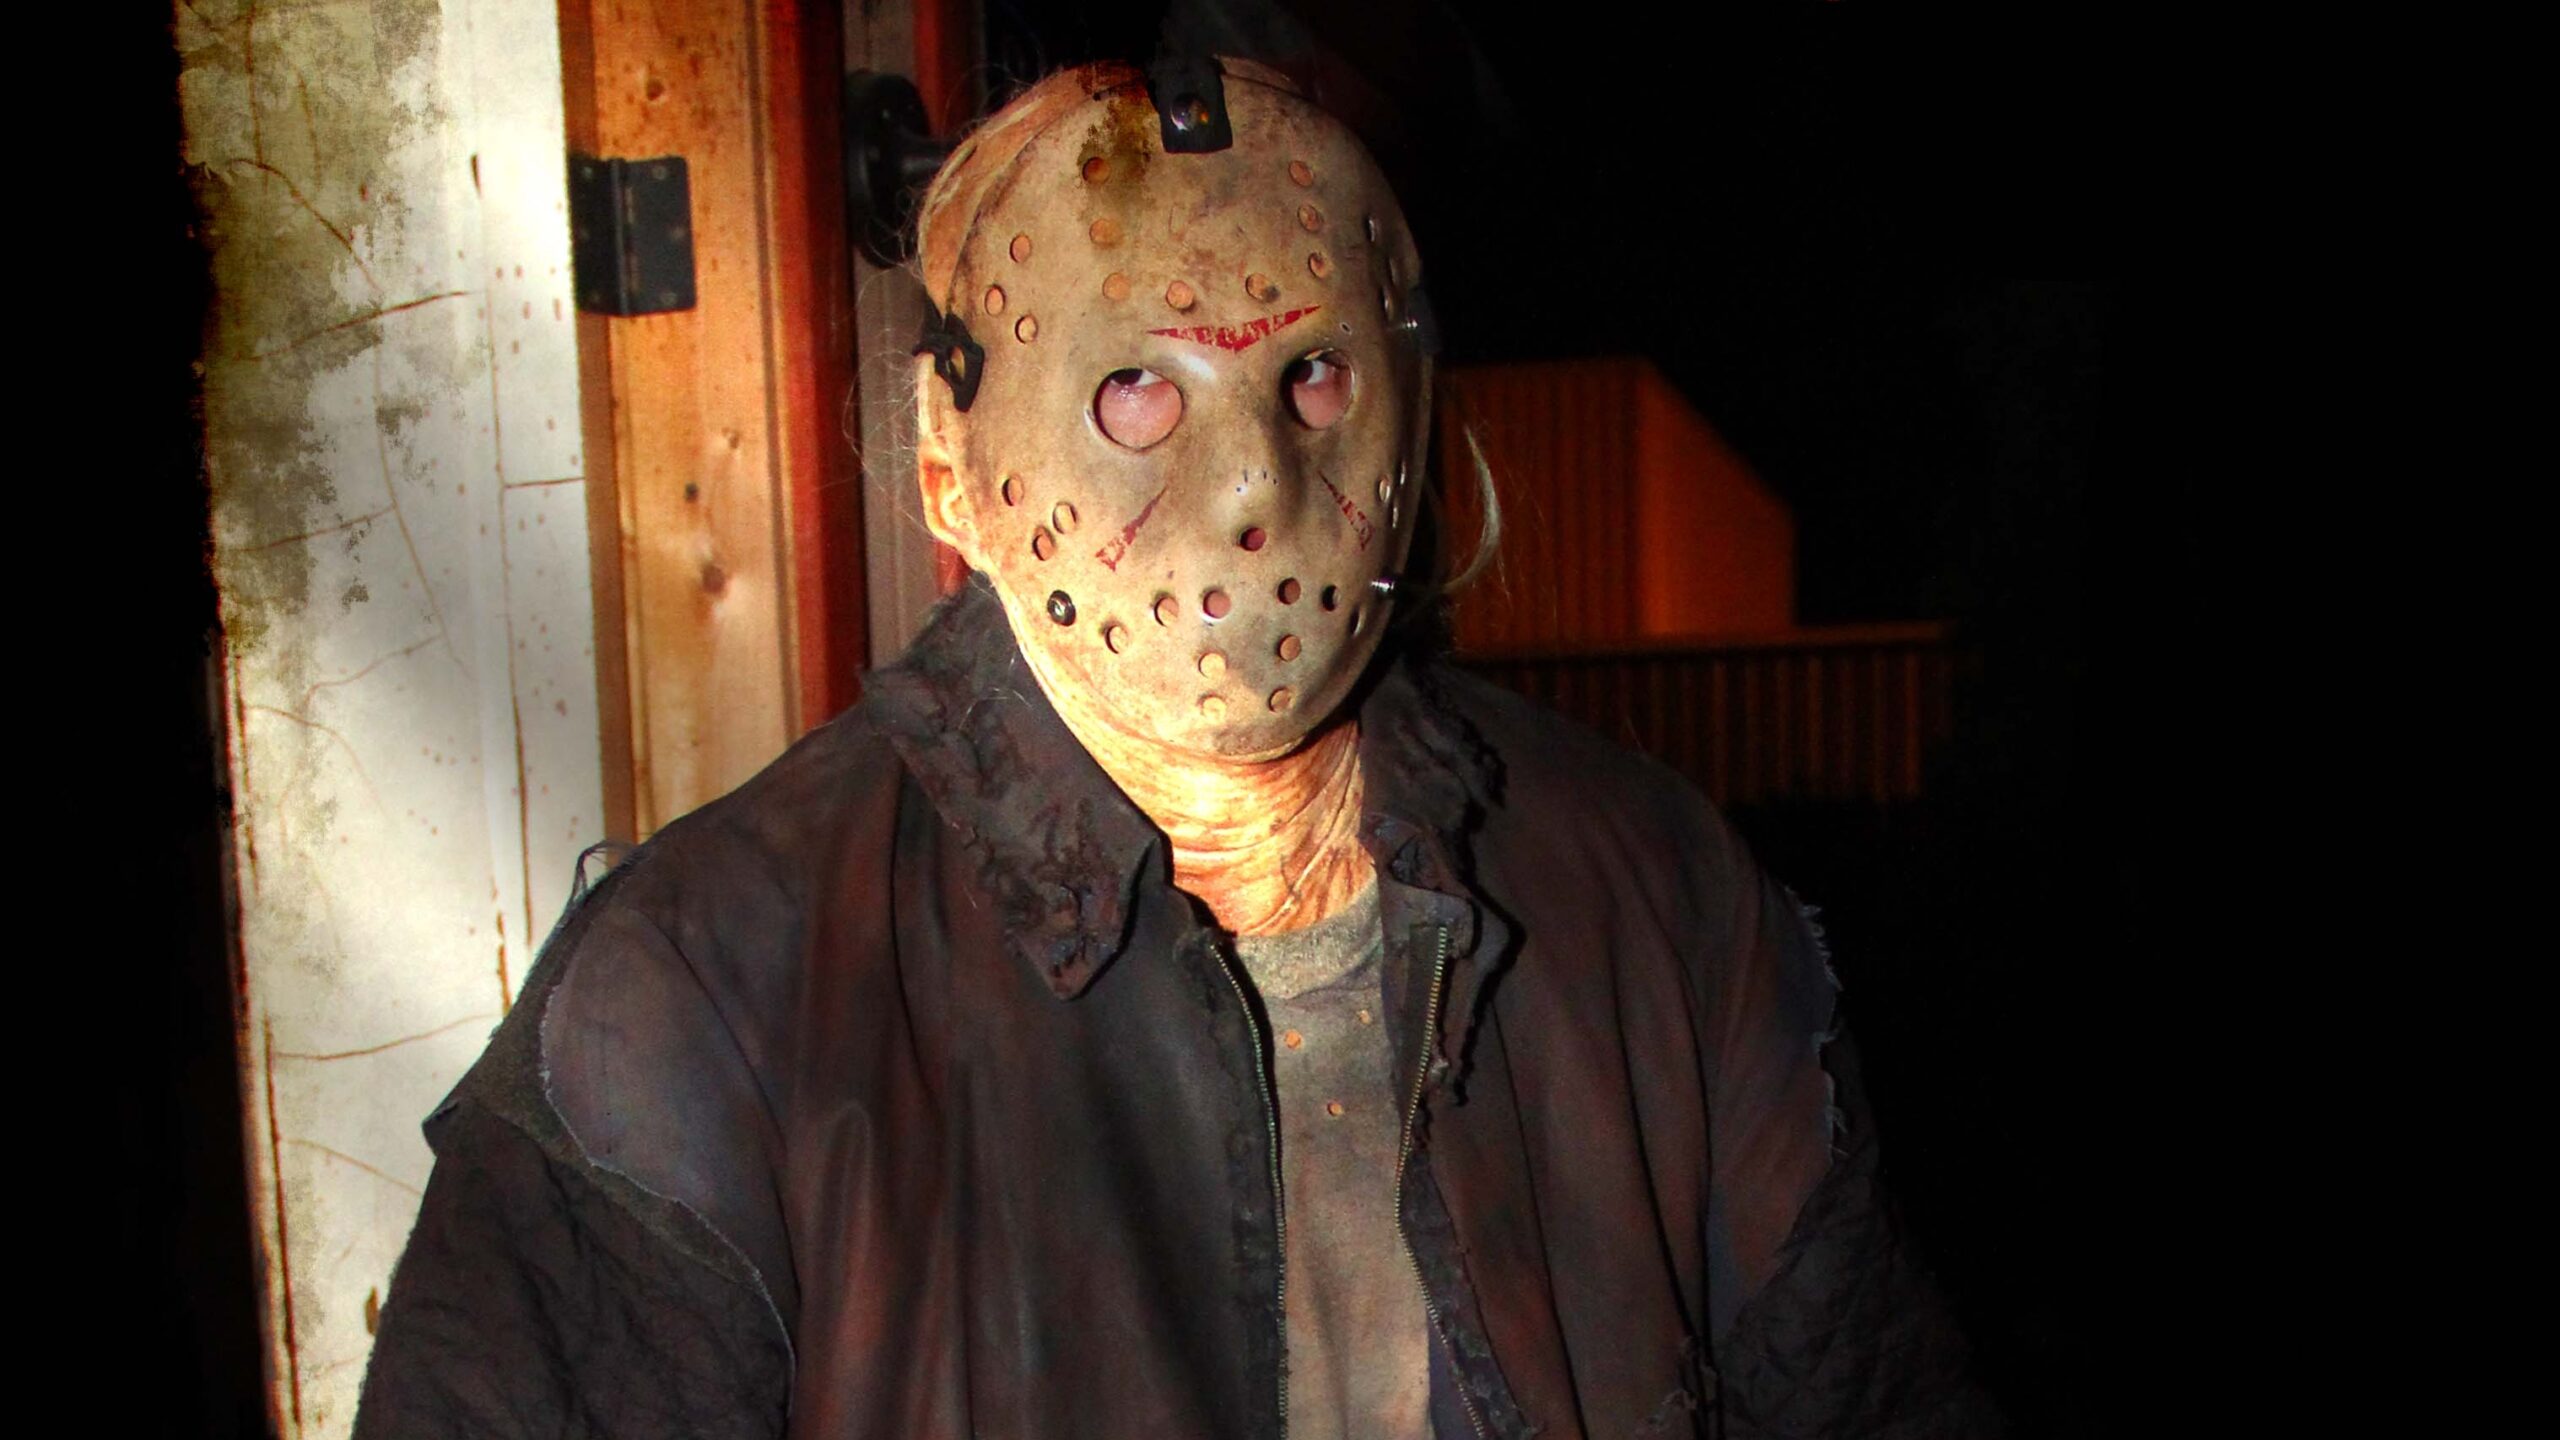 Friday the 13th 4k UHD Review